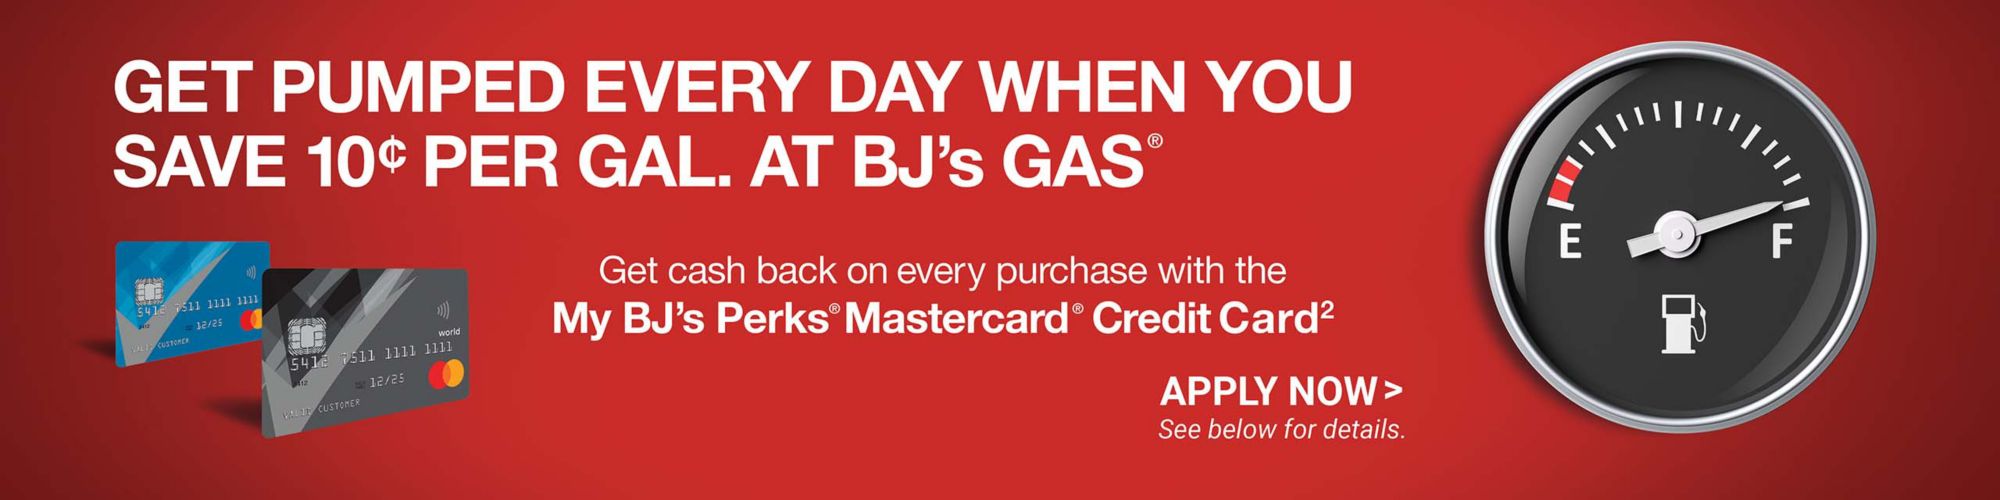 Get pumped every day when you save 10 cents per gallon at BJ's gas. Get cash back on every purchase with the My BJ's Perks Mastercard credit card. CLick to apply now. See below for details.